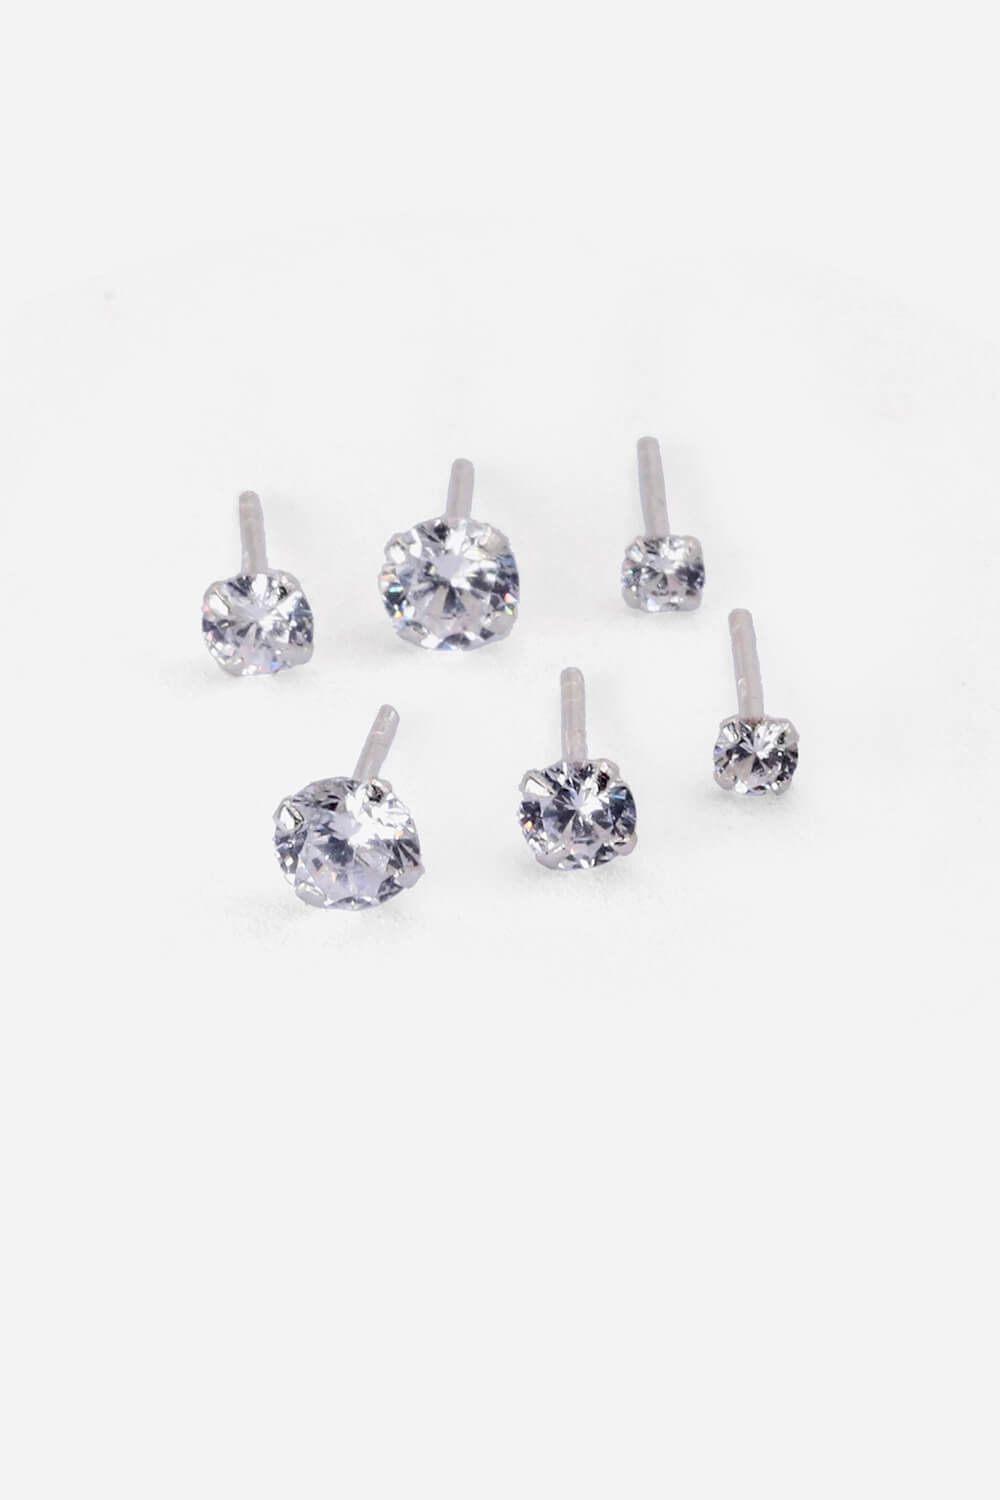 Sterling Silver Cubic Zirconia Stud Earring Set , Image 4 of 4